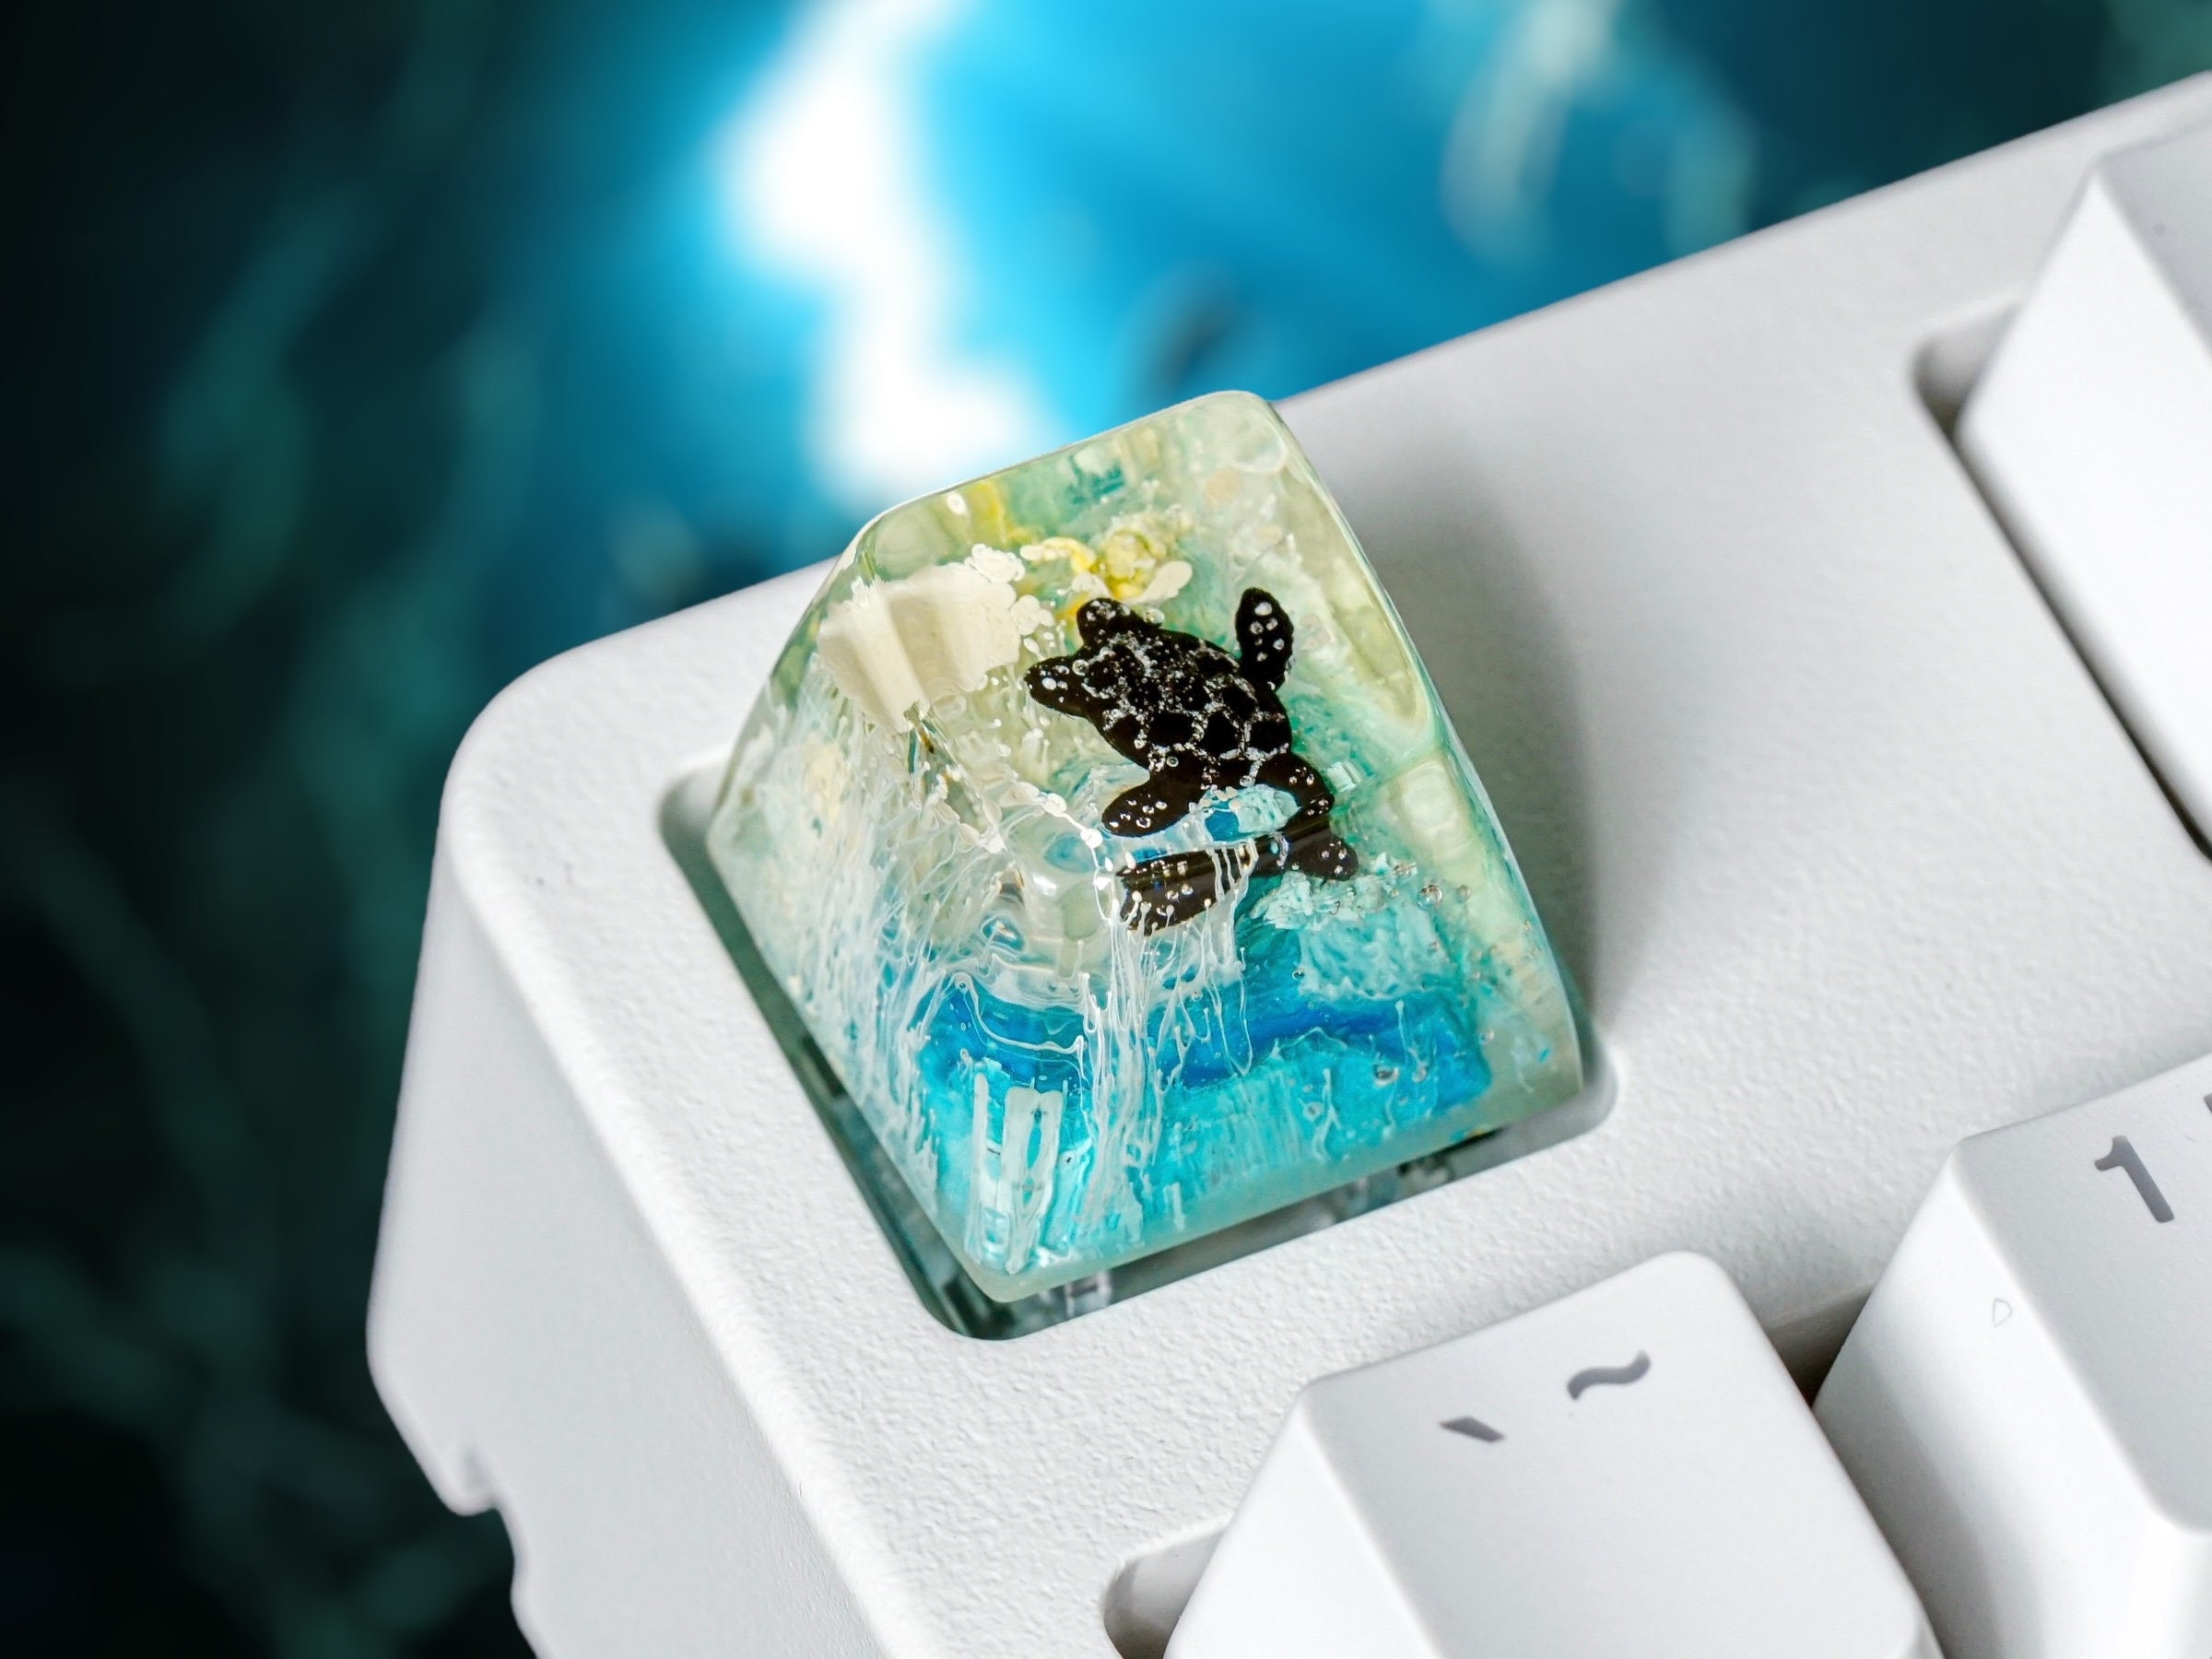 Black Turtle Keycap, White Coral, SA Profile Keycap, Keycap for MX Cherry Switches Mechanical Keyboard, Handmade Gift